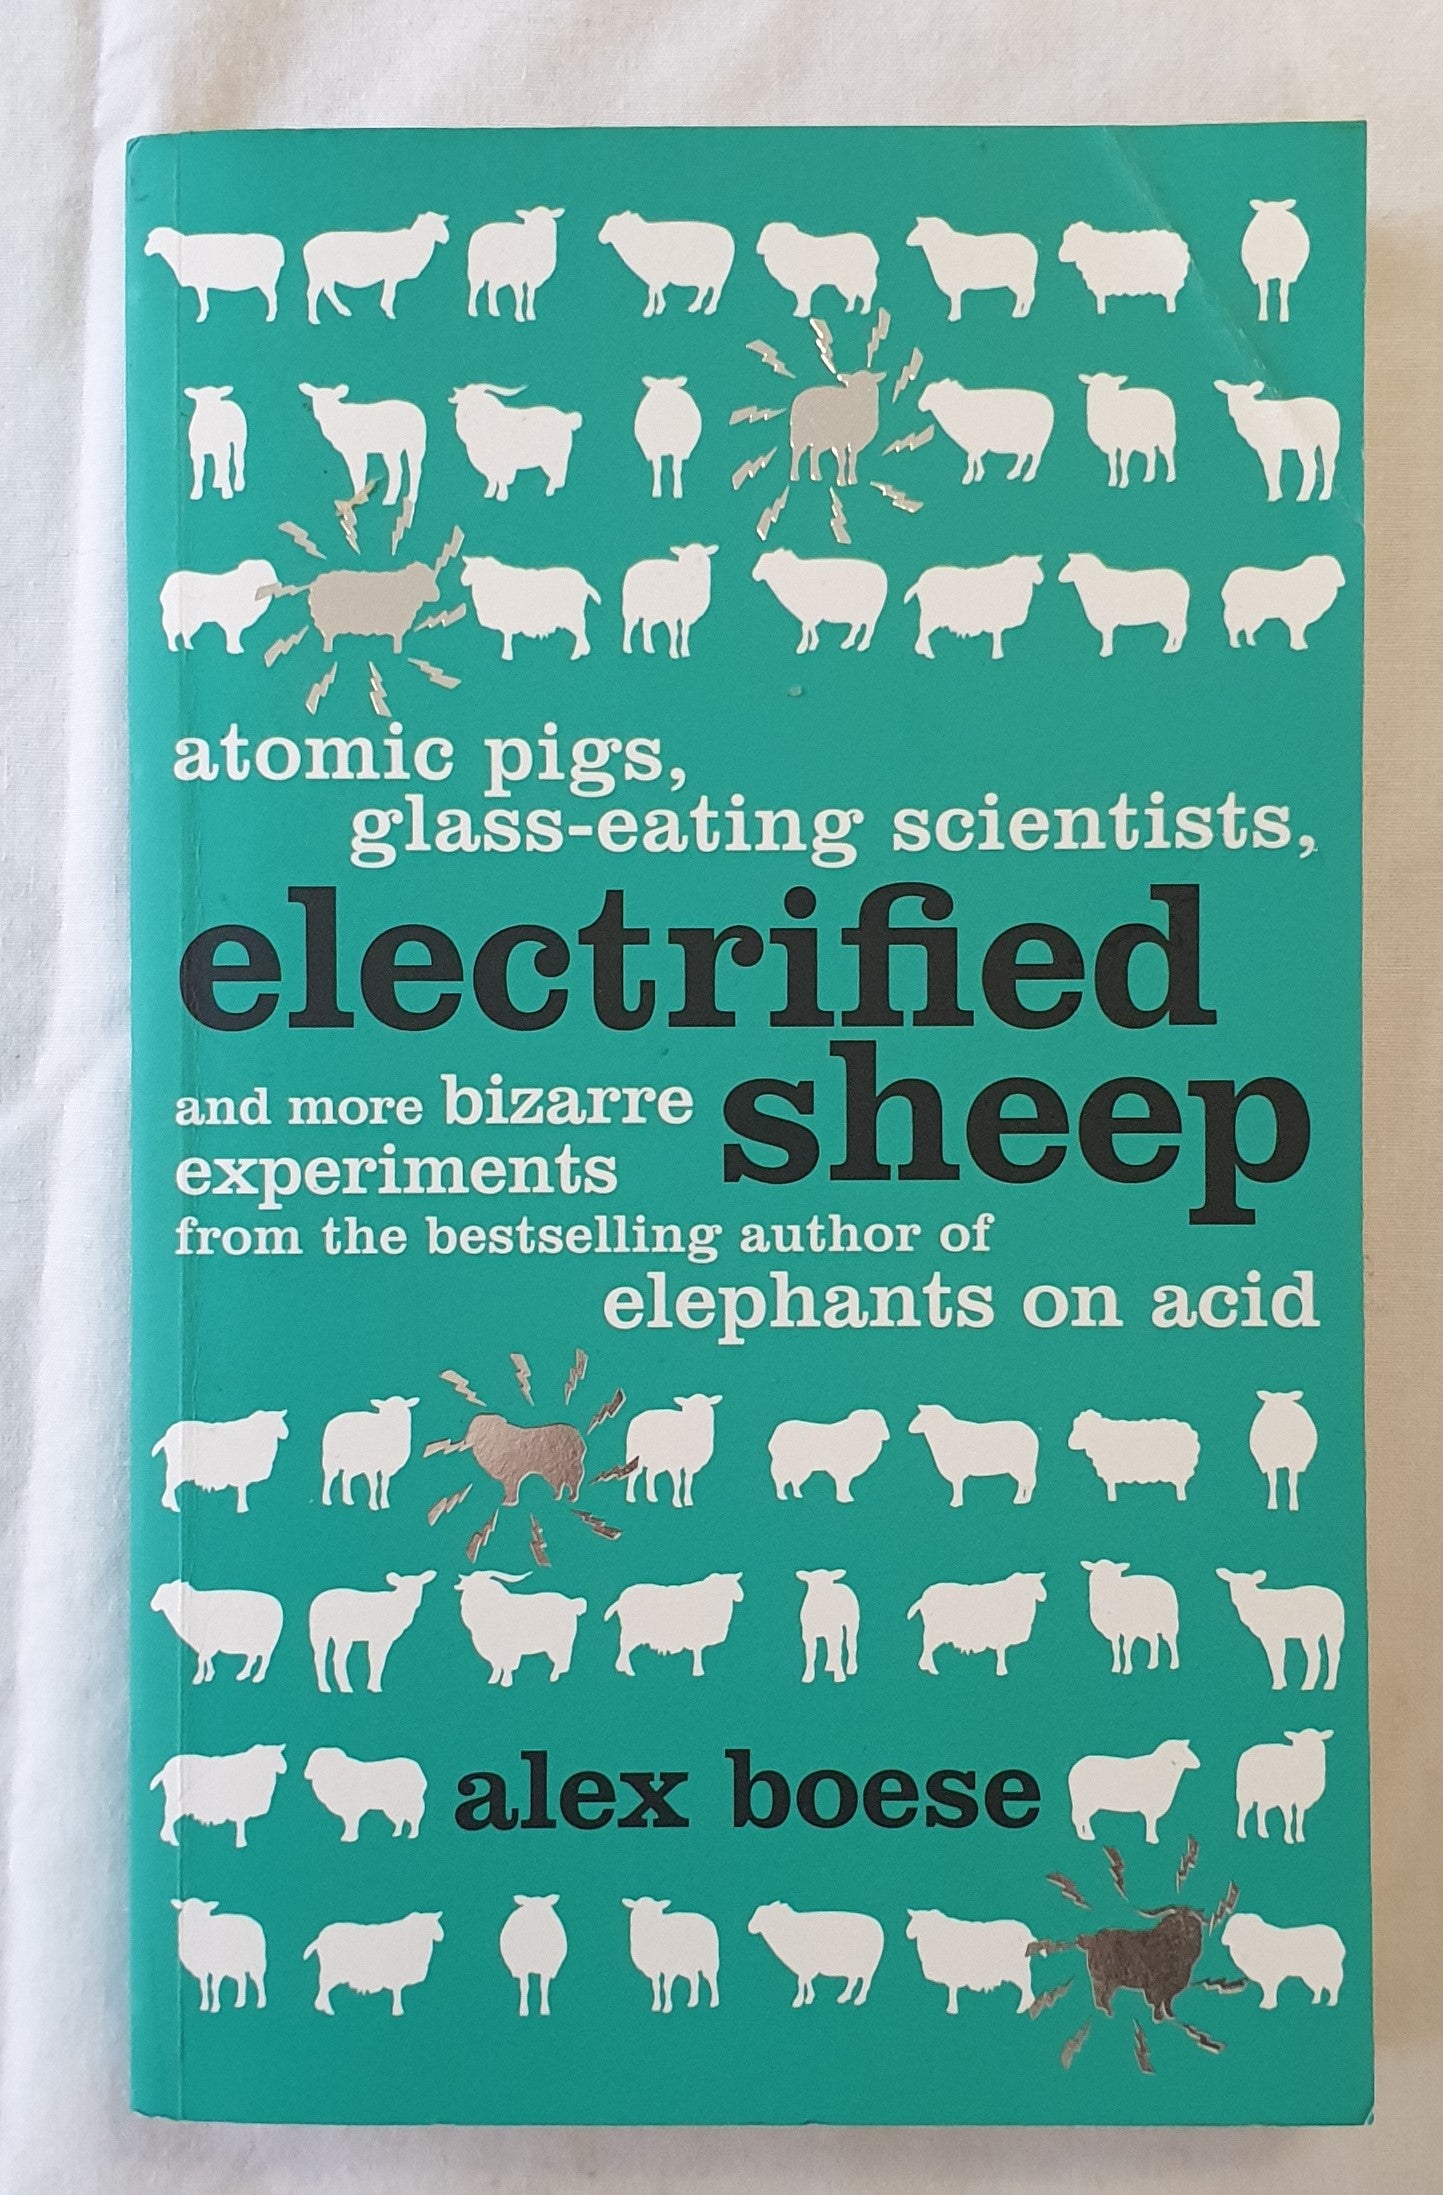 Electrified Sheep  And Other Bizarre Experiments  by Alex Boese